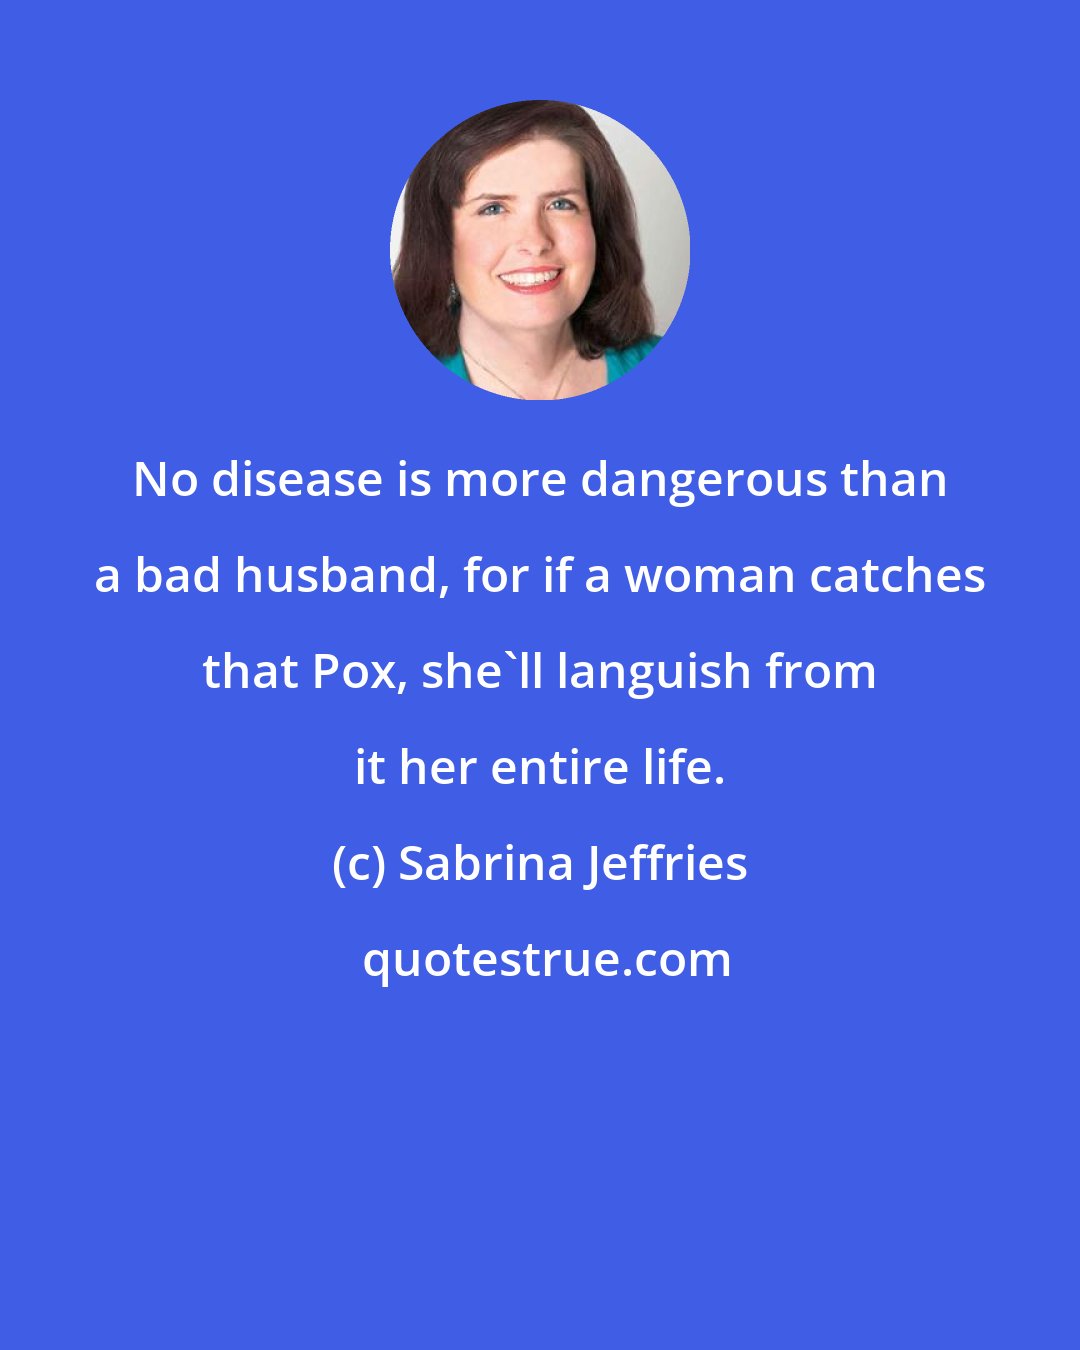 Sabrina Jeffries: No disease is more dangerous than a bad husband, for if a woman catches that Pox, she'll languish from it her entire life.